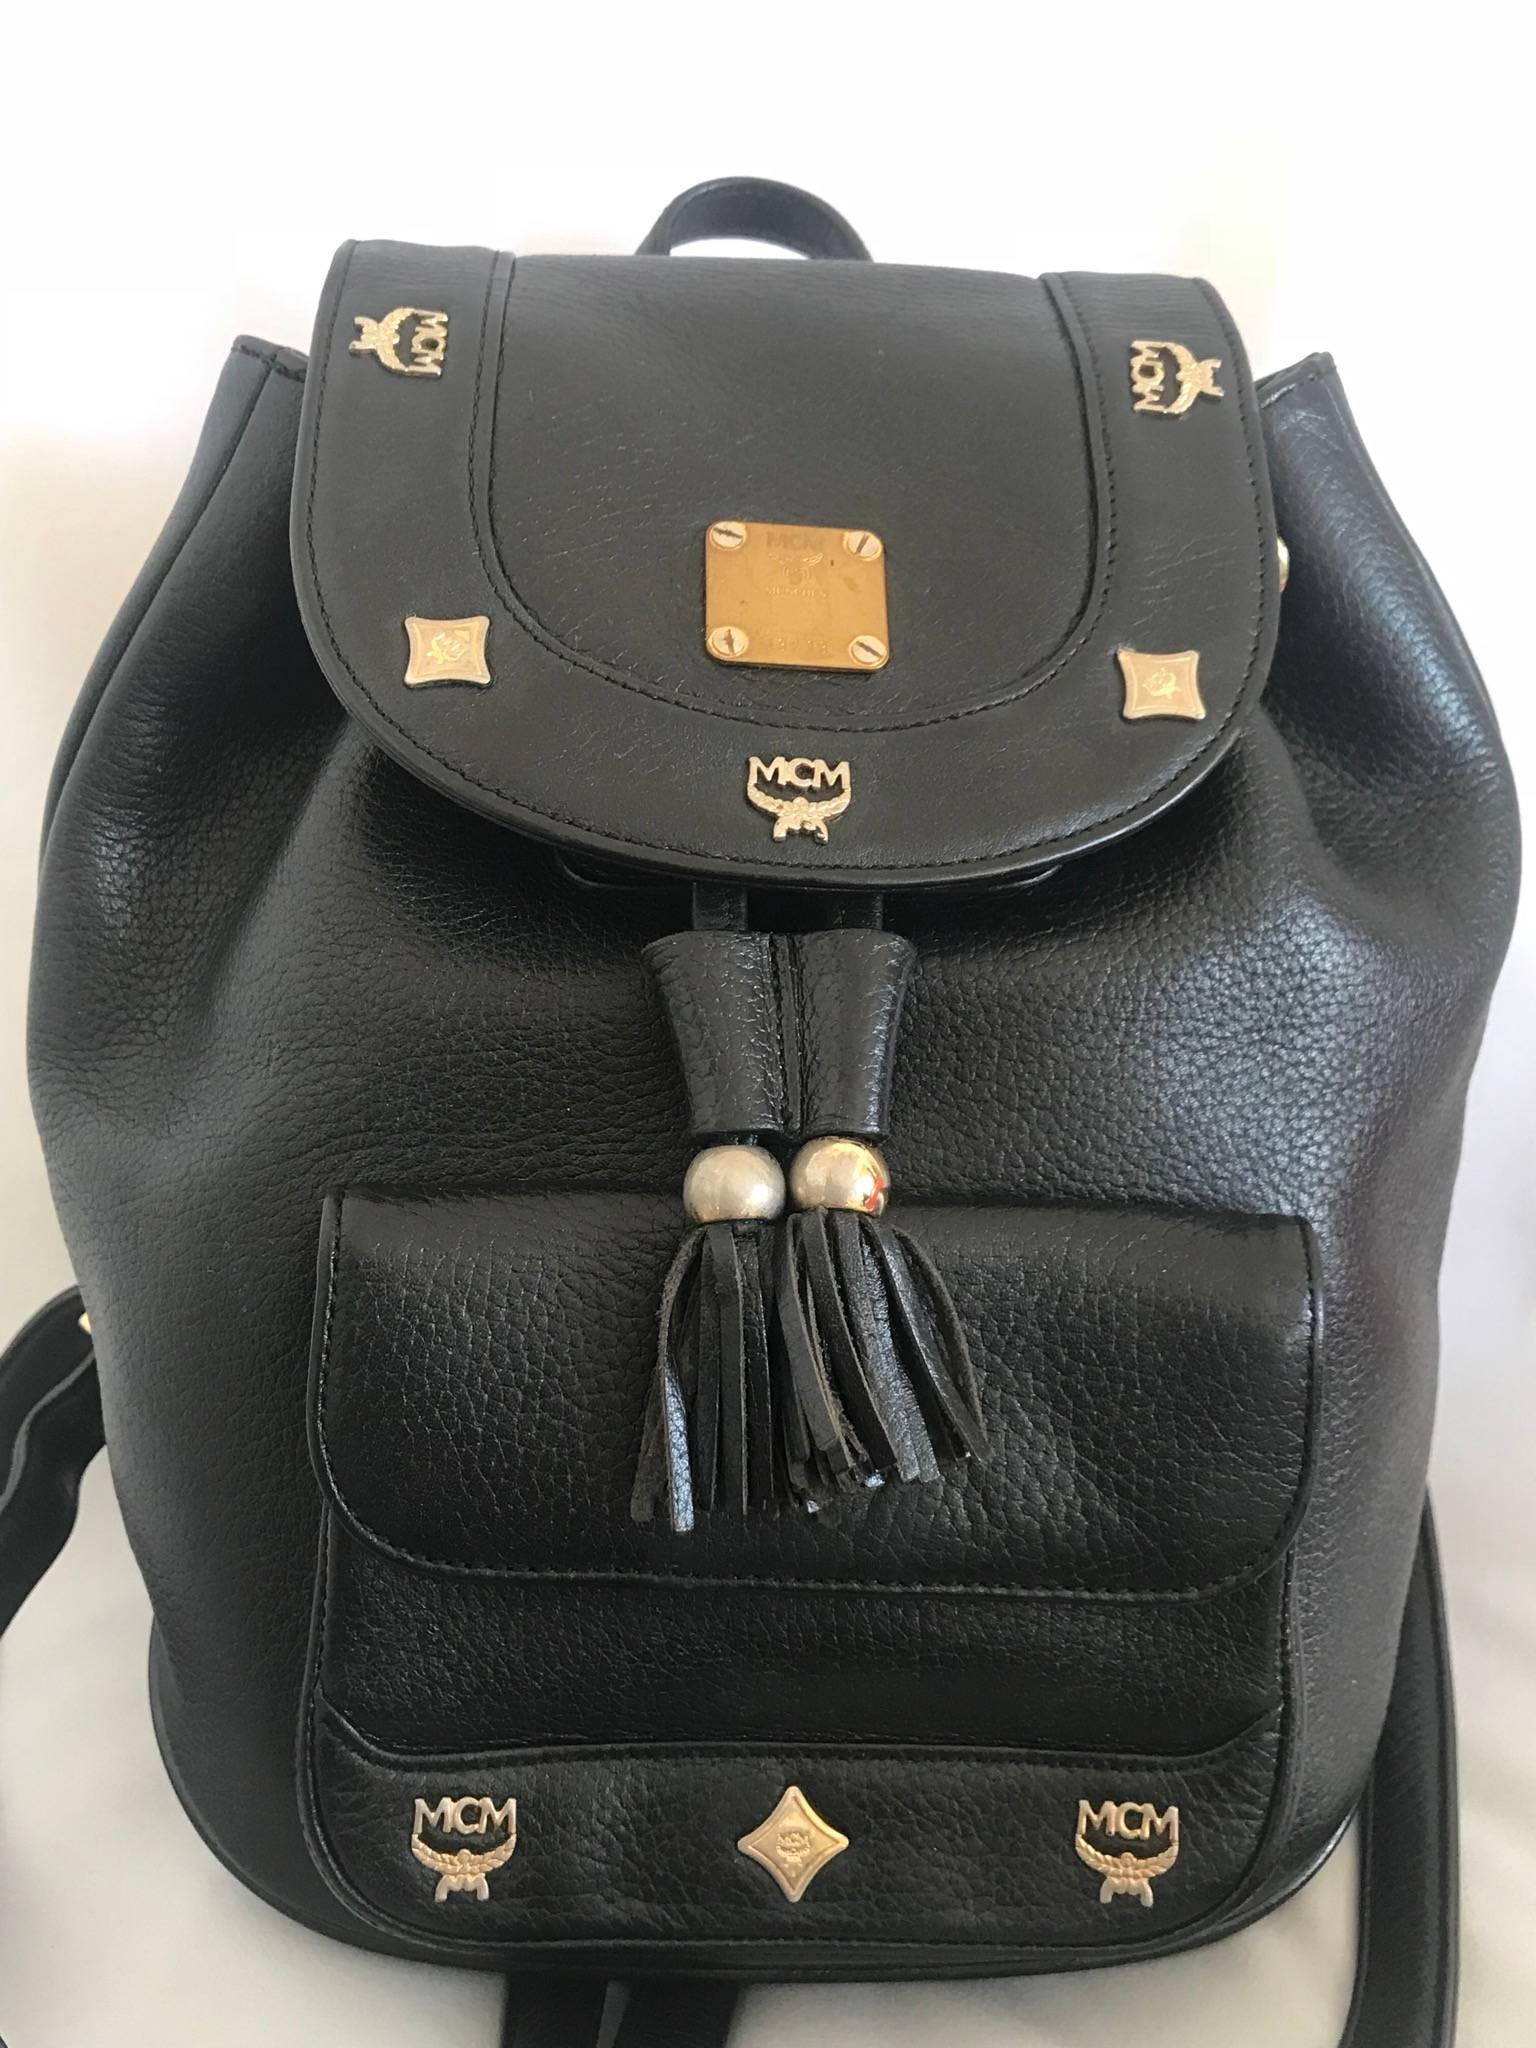 1980s. Vintage MCM black backpack with golden studded logo motifs and drawstrings. Designed by Michael Cromer. Unisex bag for daily use.

MCM has now come back in trend and so hot in the market!!

This is the vintage MCM black genuine leather